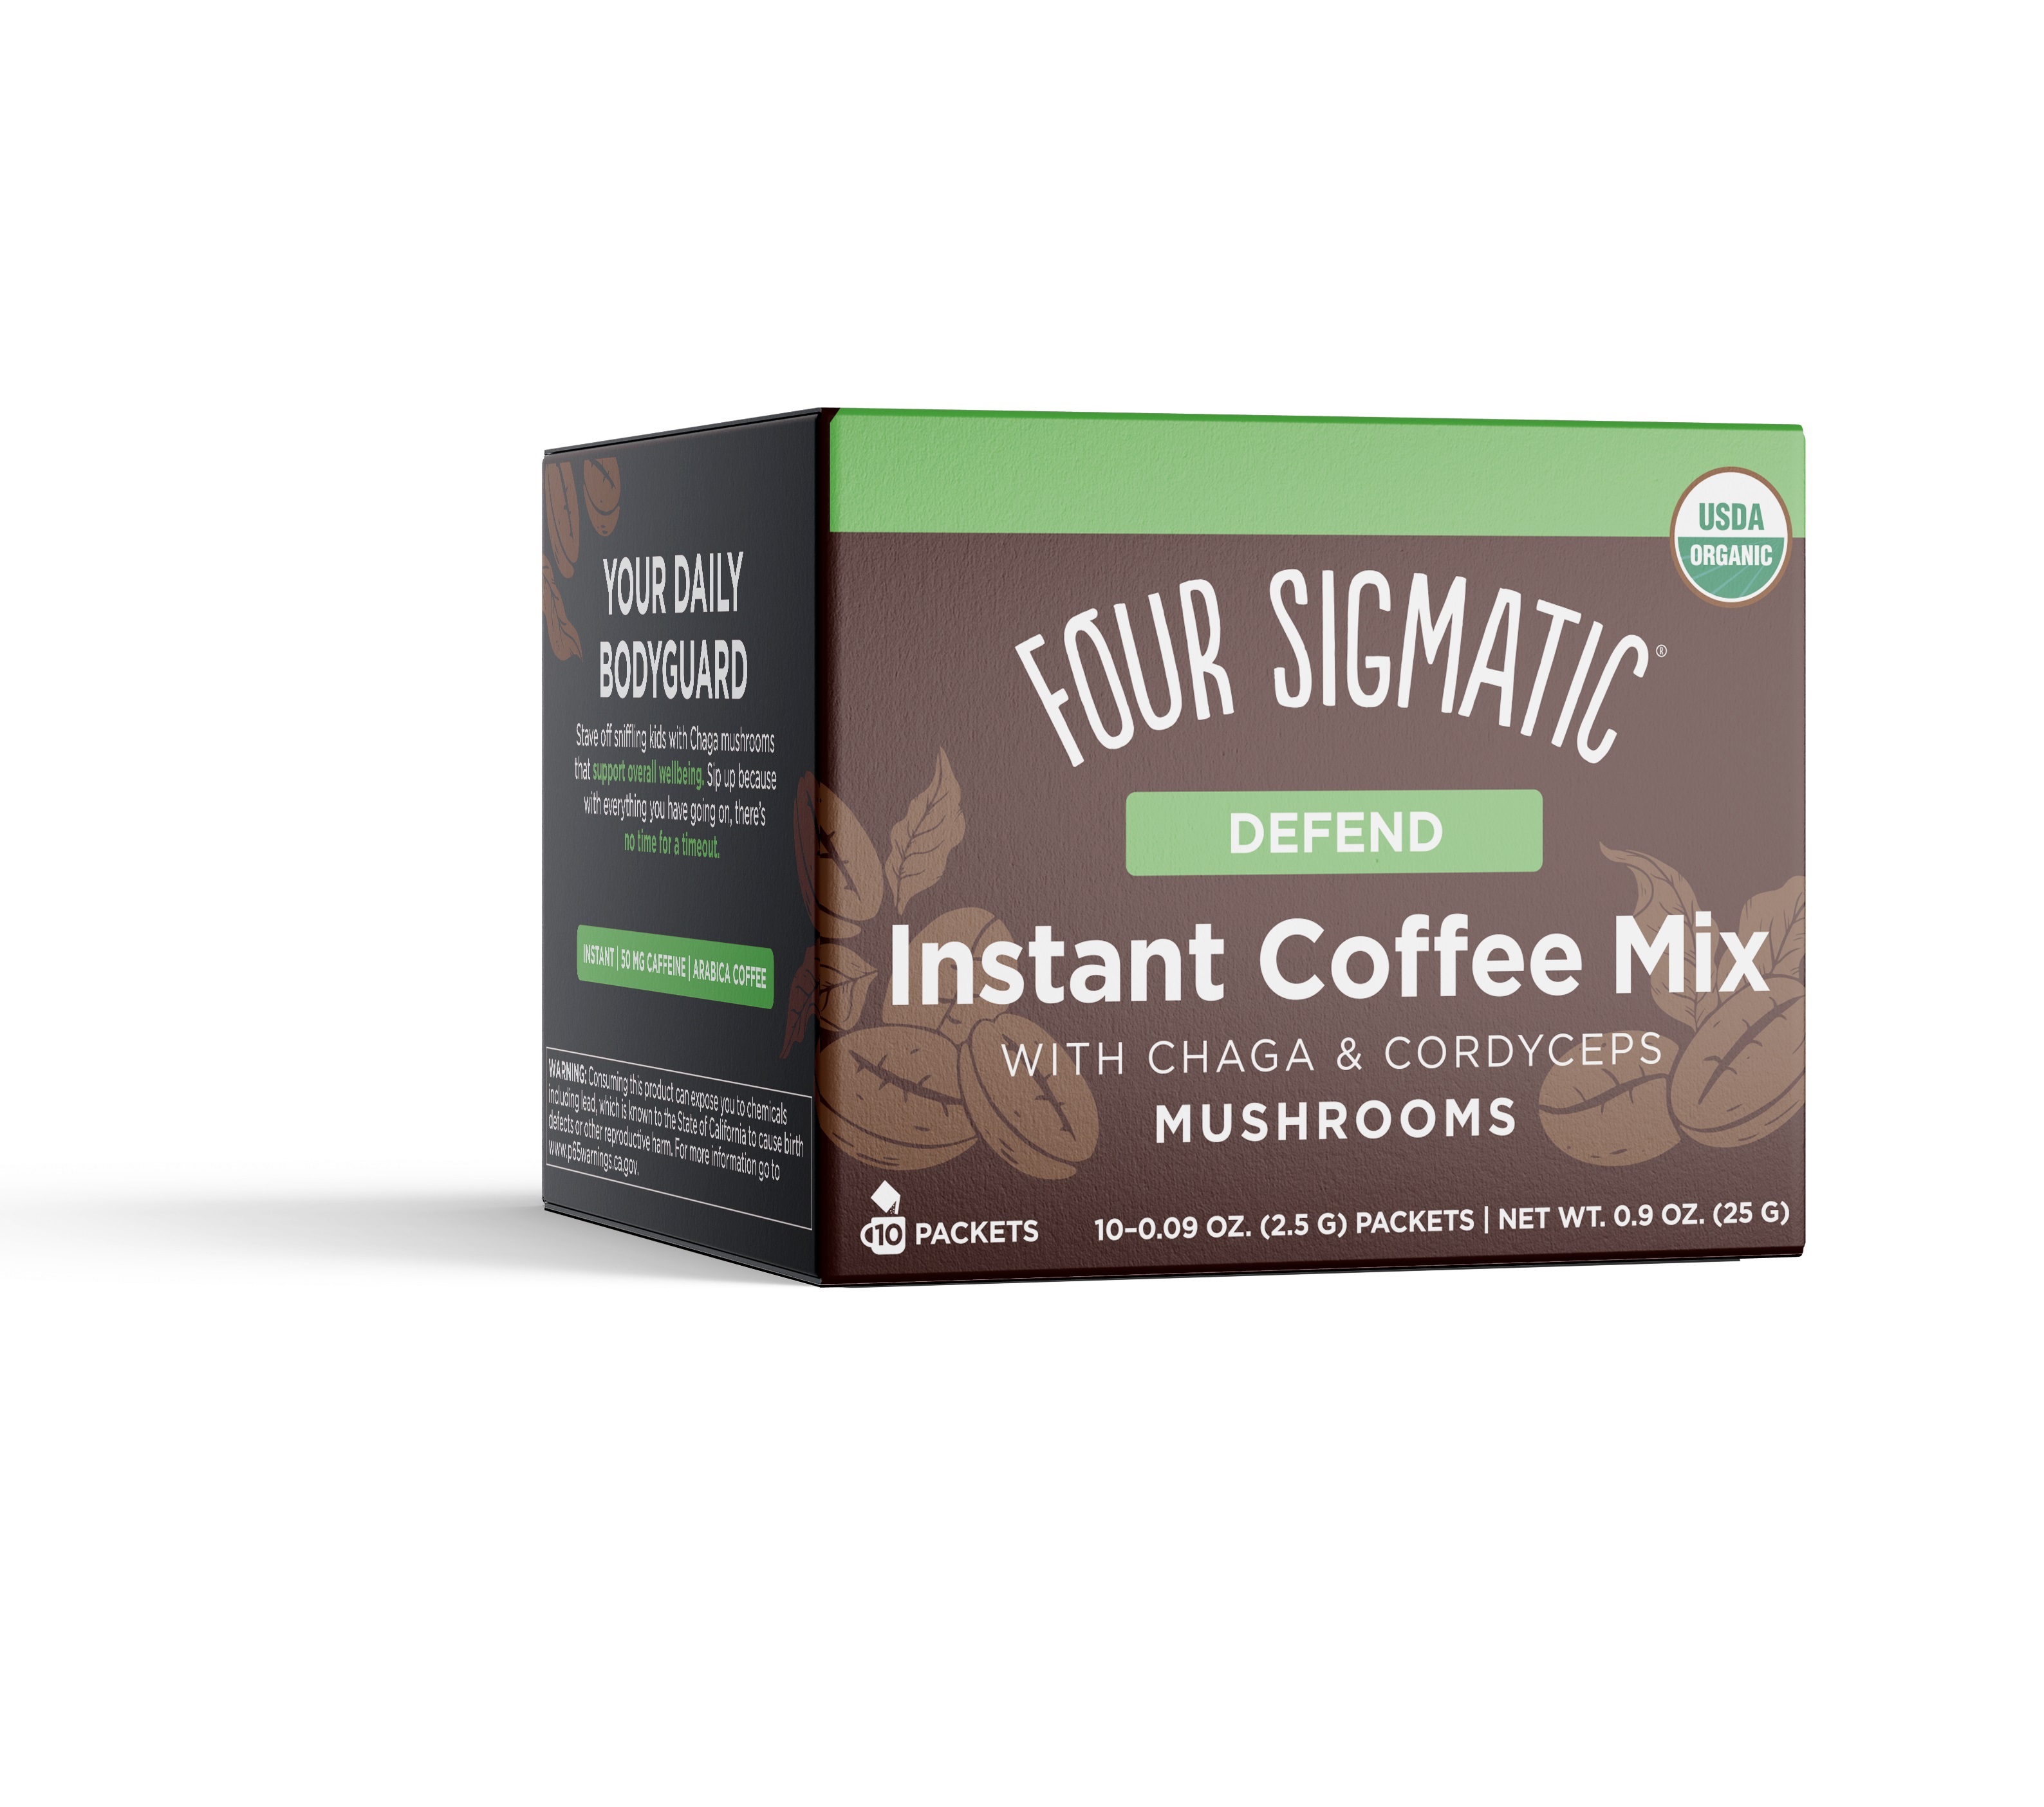 Four Sigmatic - Defend Instant Mushroom Coffee Mix with Chaga